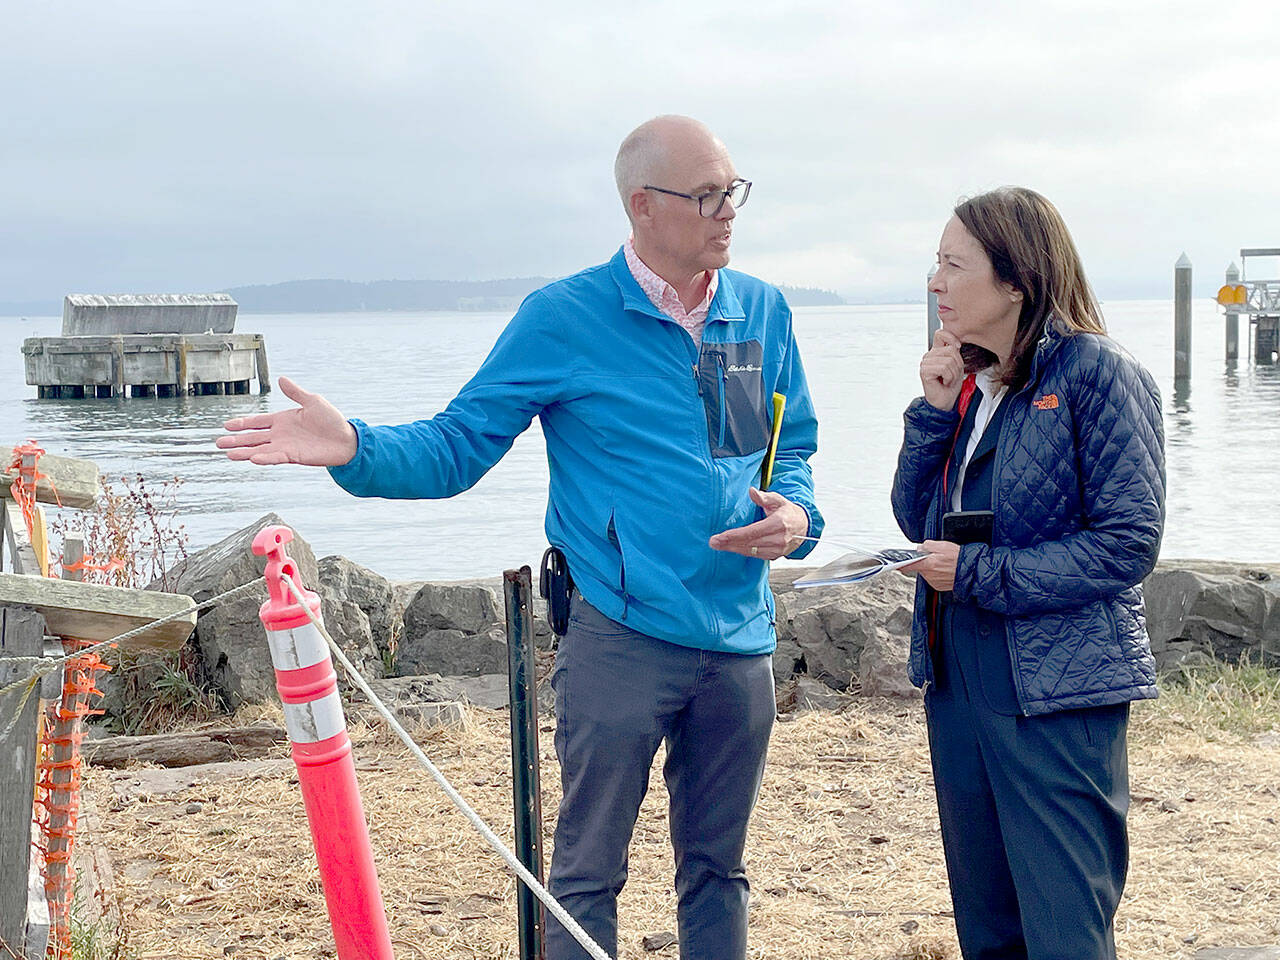 U.S. Sen. Maria Cantwell, right, visits the jetty renovation project at Point Hudson with Port of Port Townsend Executive Director Eron Berg. Half of the funds for the $14.1 million project came from a $7 million Economic Development Administration grant from the U.S. Department of Commerce. Cantwell is Chair of the Senate Committee on Commerce, Science, and Transportation. (Paula Hunt/Peninsula Daily News)